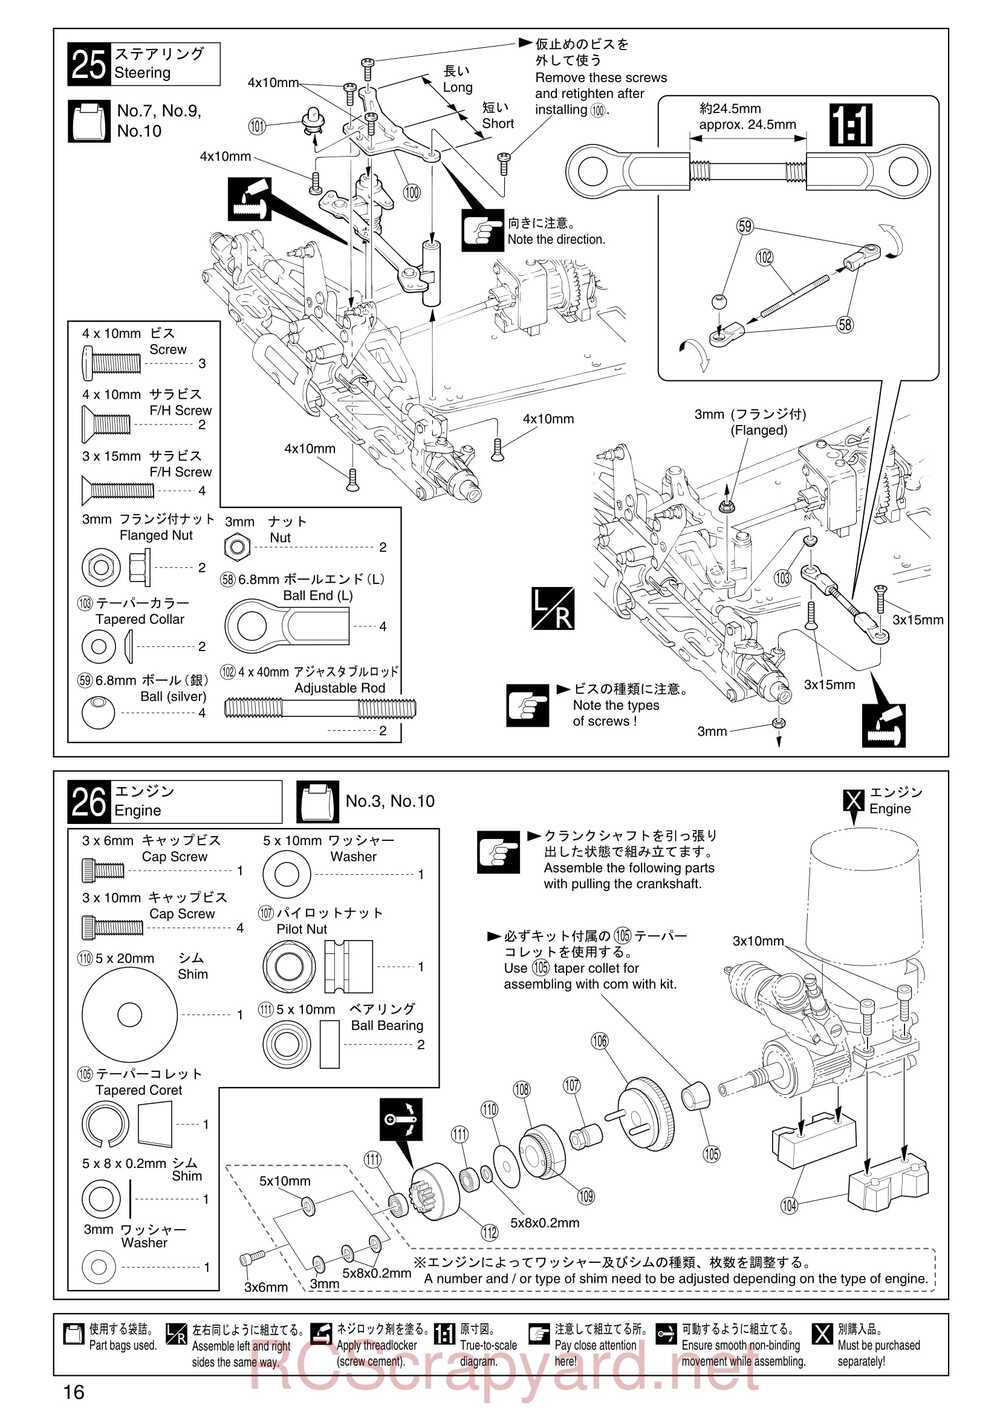 Kyosho - 31081- Inferno-MP-7-5 - Manual - Page 16